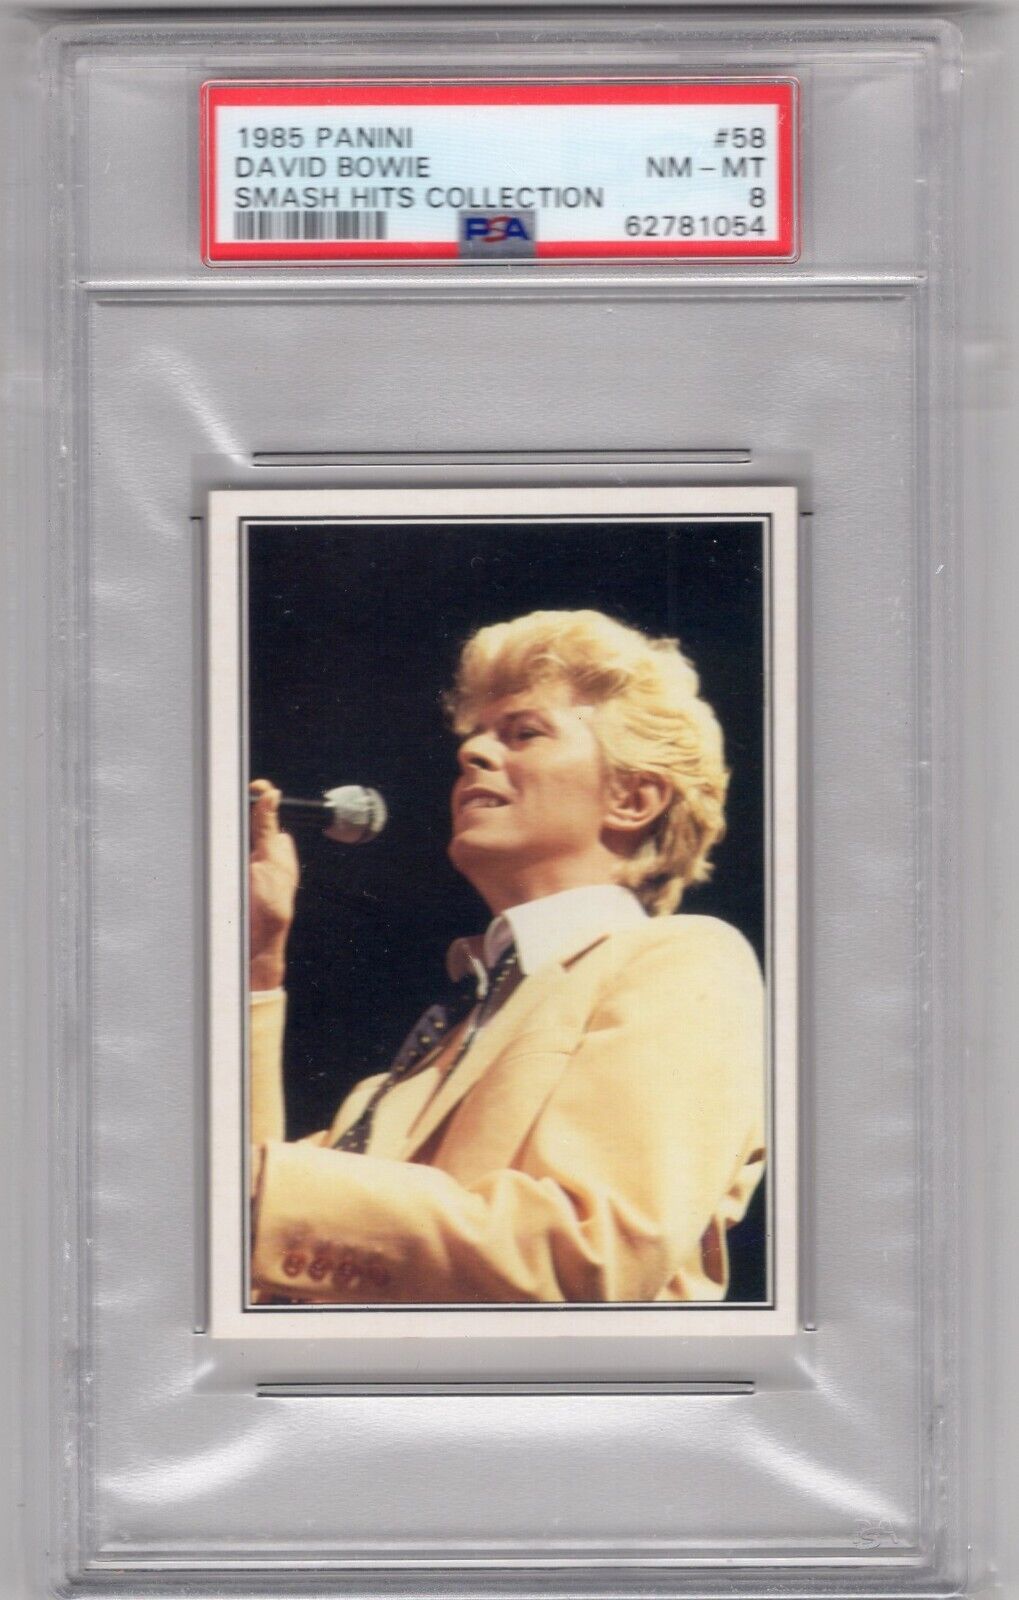 1985 Panini The Smash Hits Collection # 58 David Bowie PSA 8 POP 1 Highest